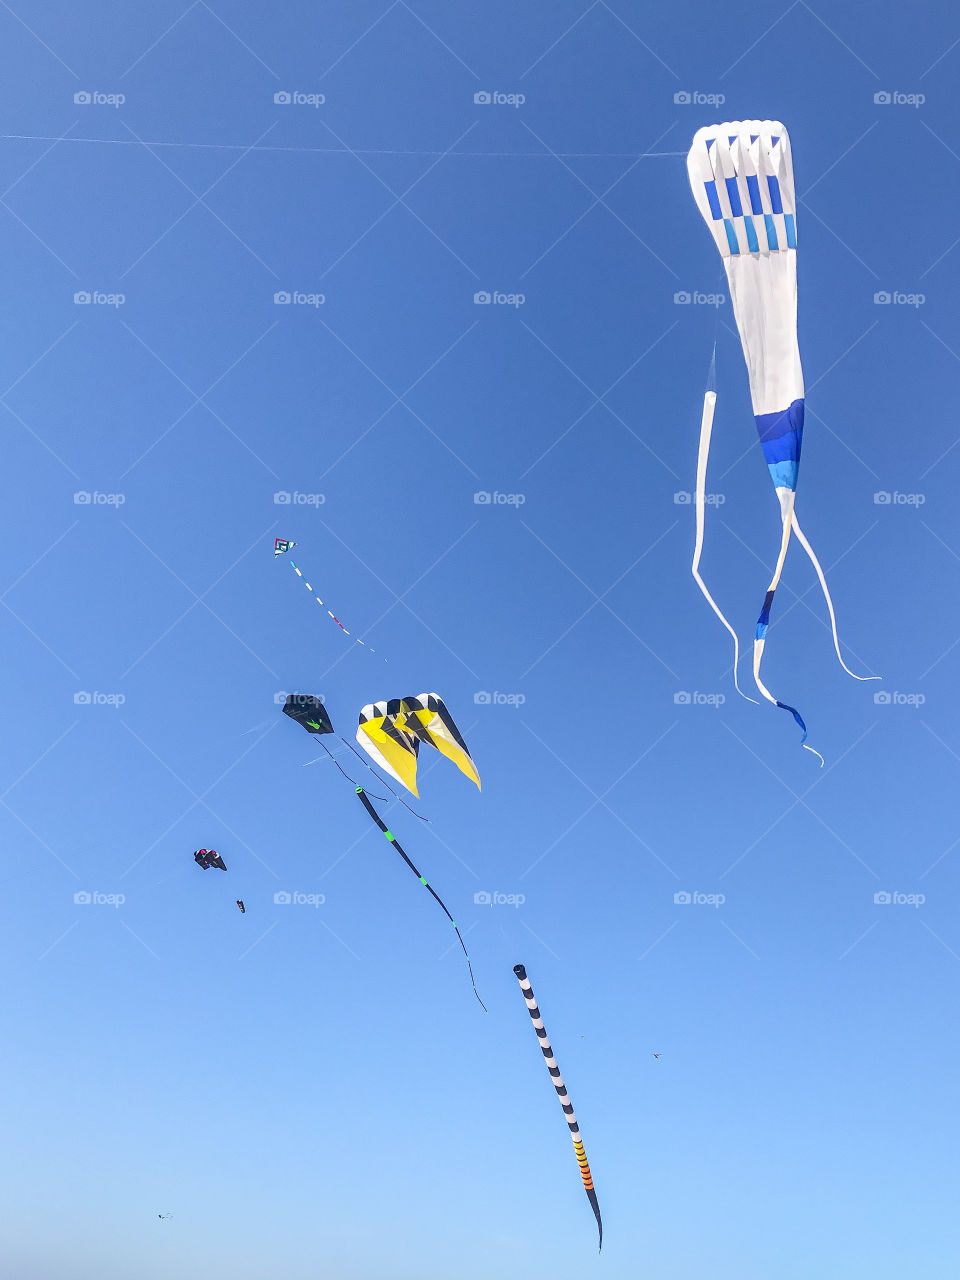 Flying Kites through Clear Blue Skies on the Beach at the Lake